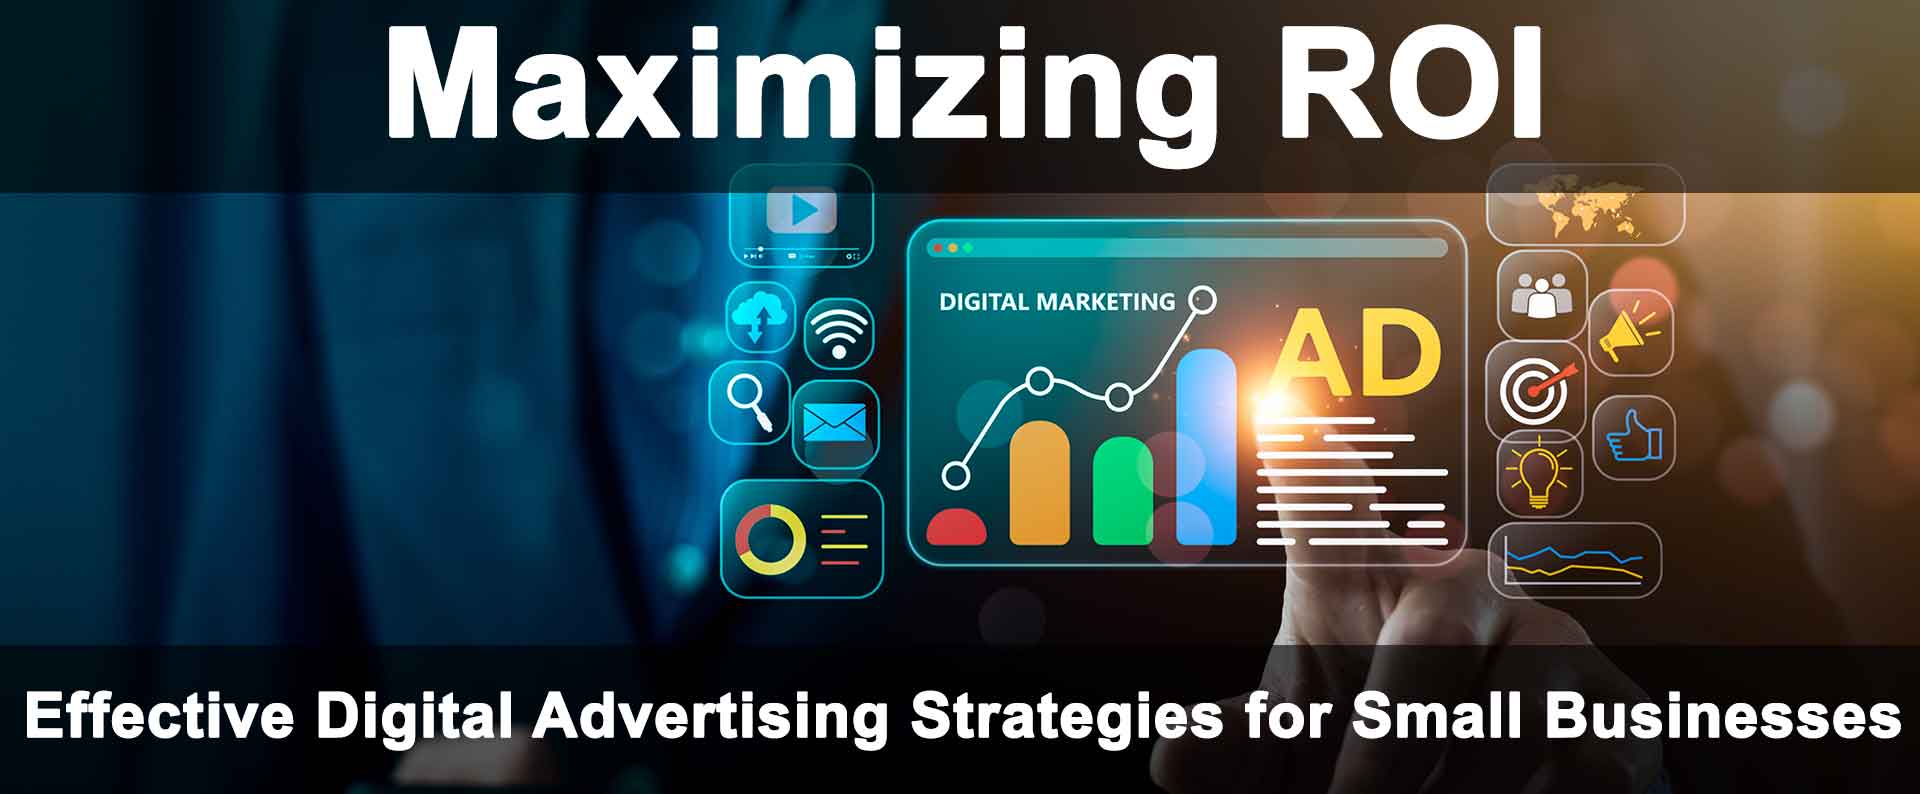 Effective Digital Advertising Strategies for Small Businesses